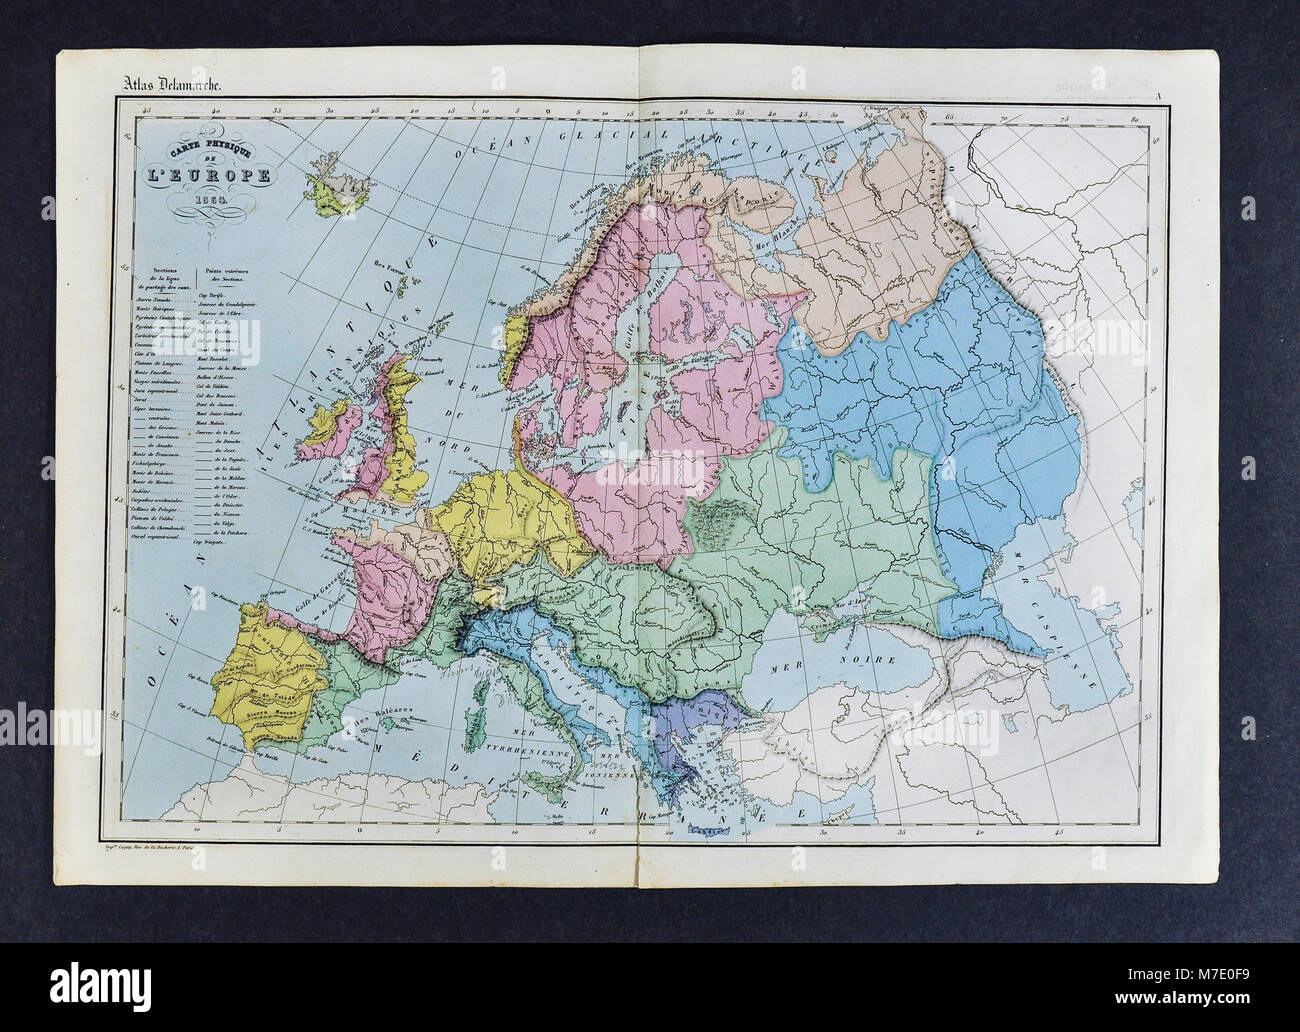 1864 Delamarche Physical Map of Europe Stock Photo